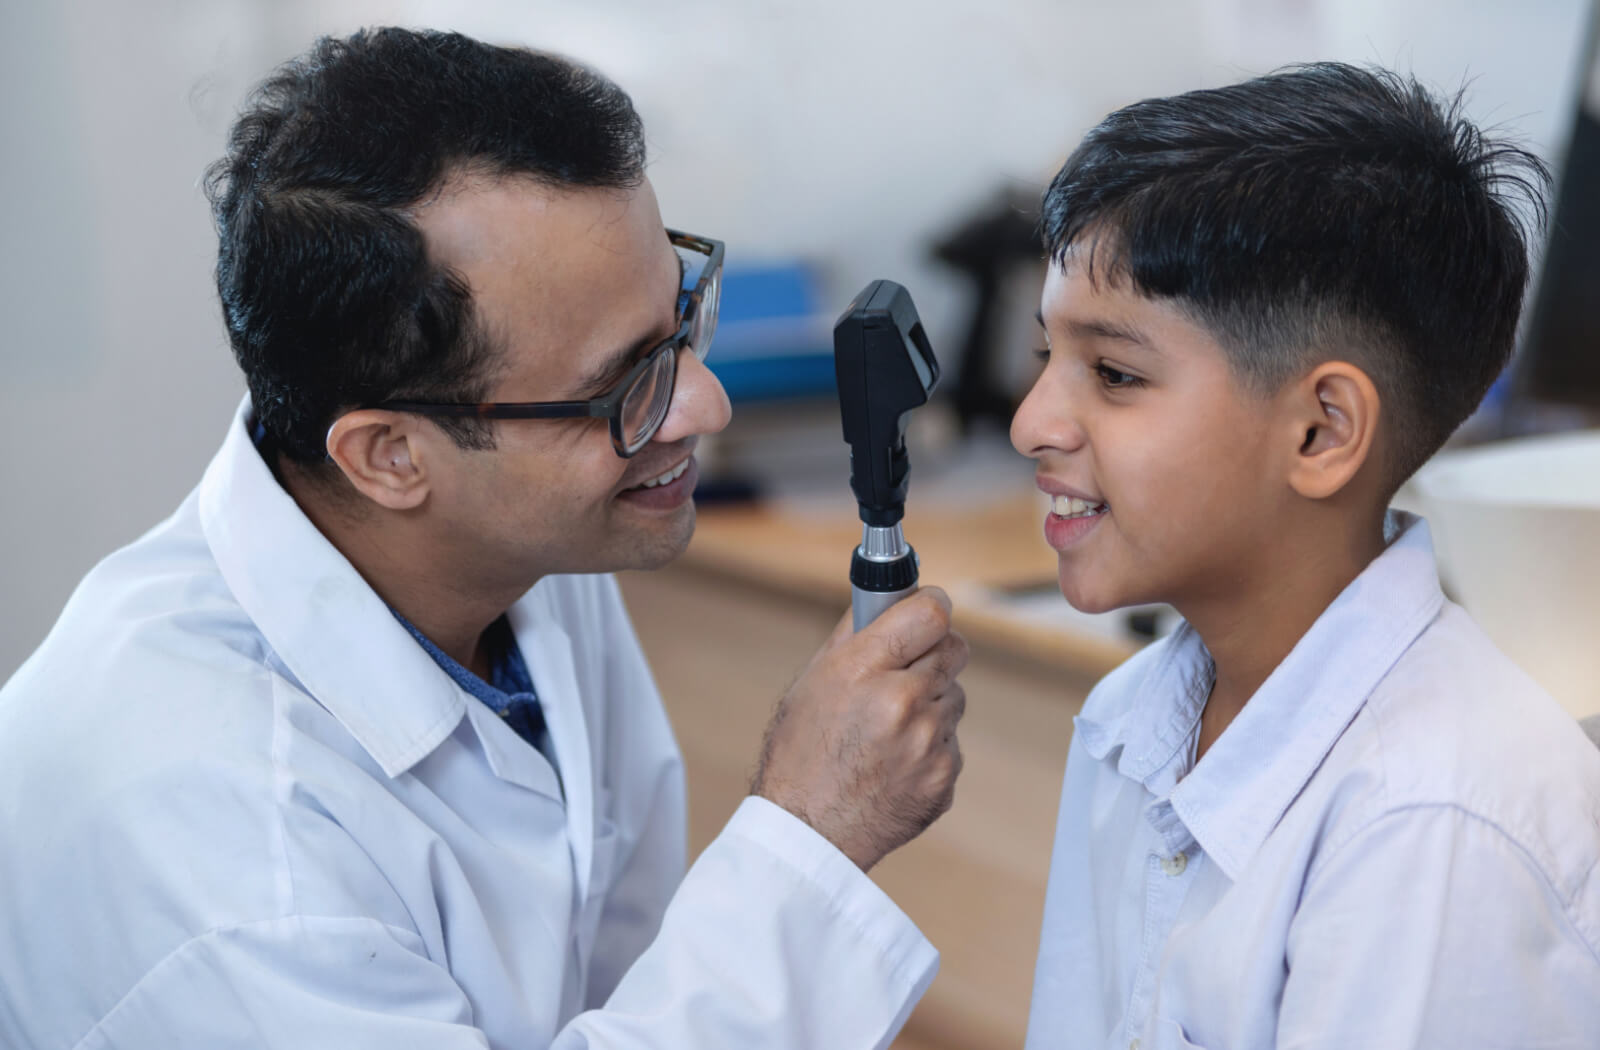 A smiling optometrist conducting an eye exam on a boy using a device to look into the boy's eyes.